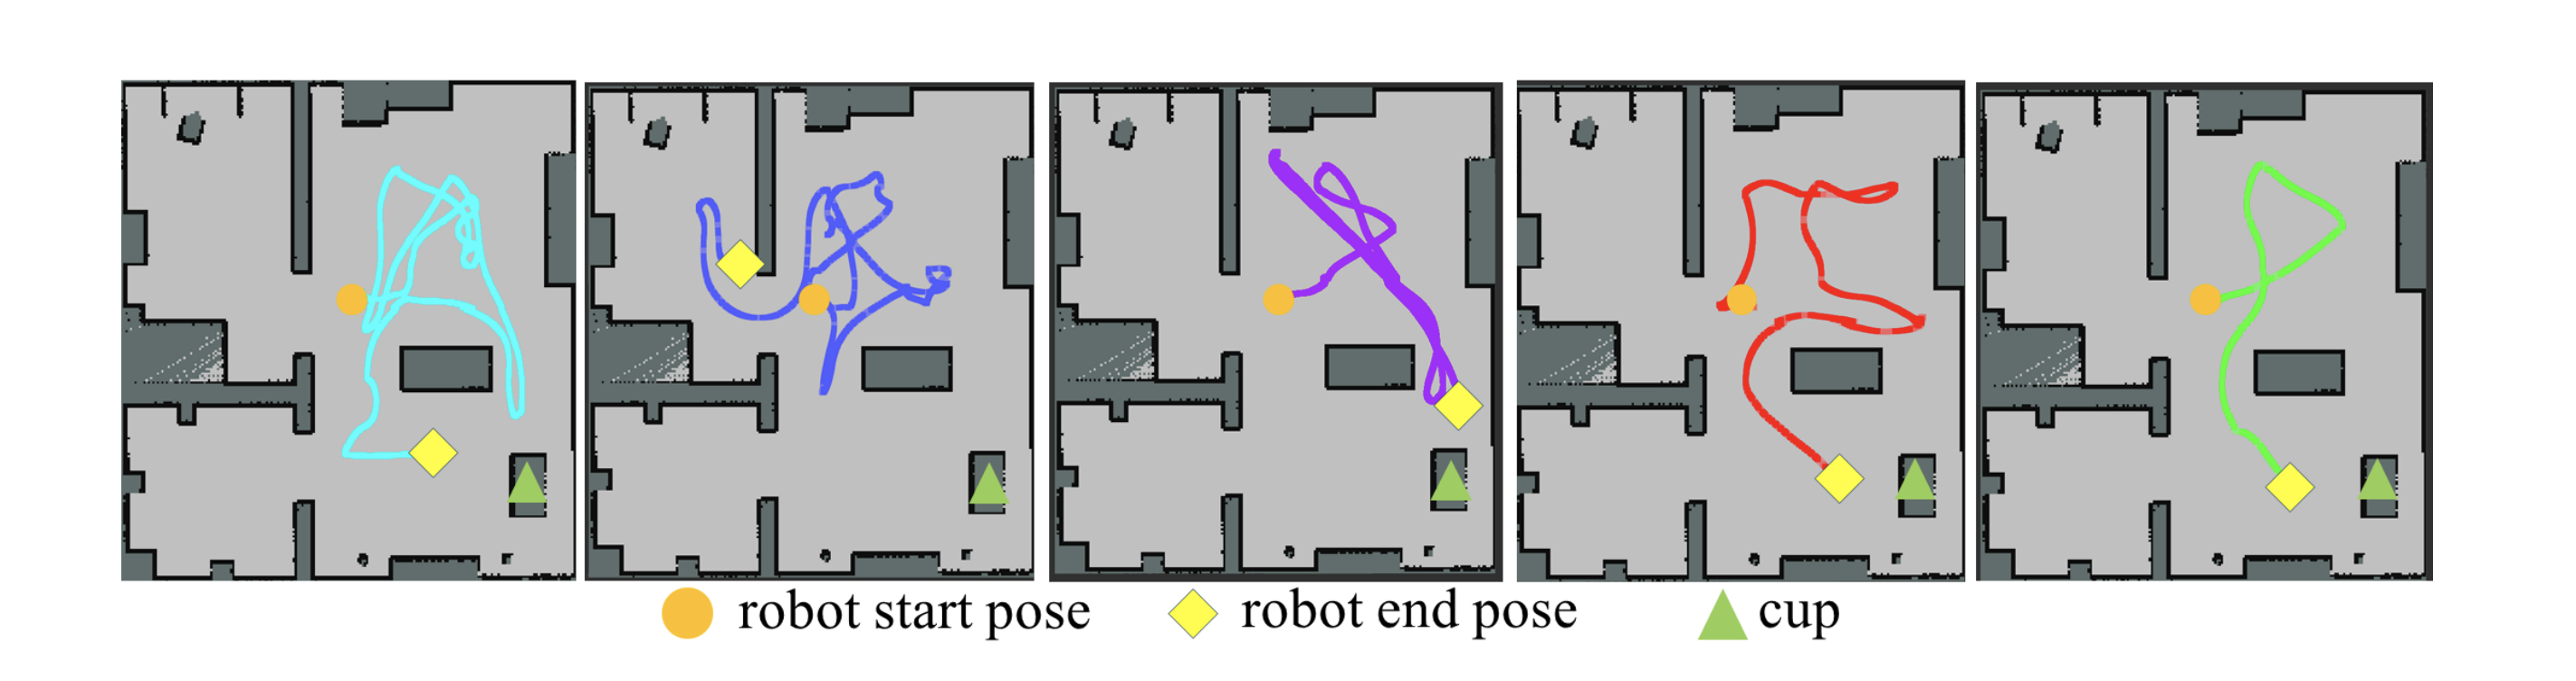 Illustration of robot's path using different methods